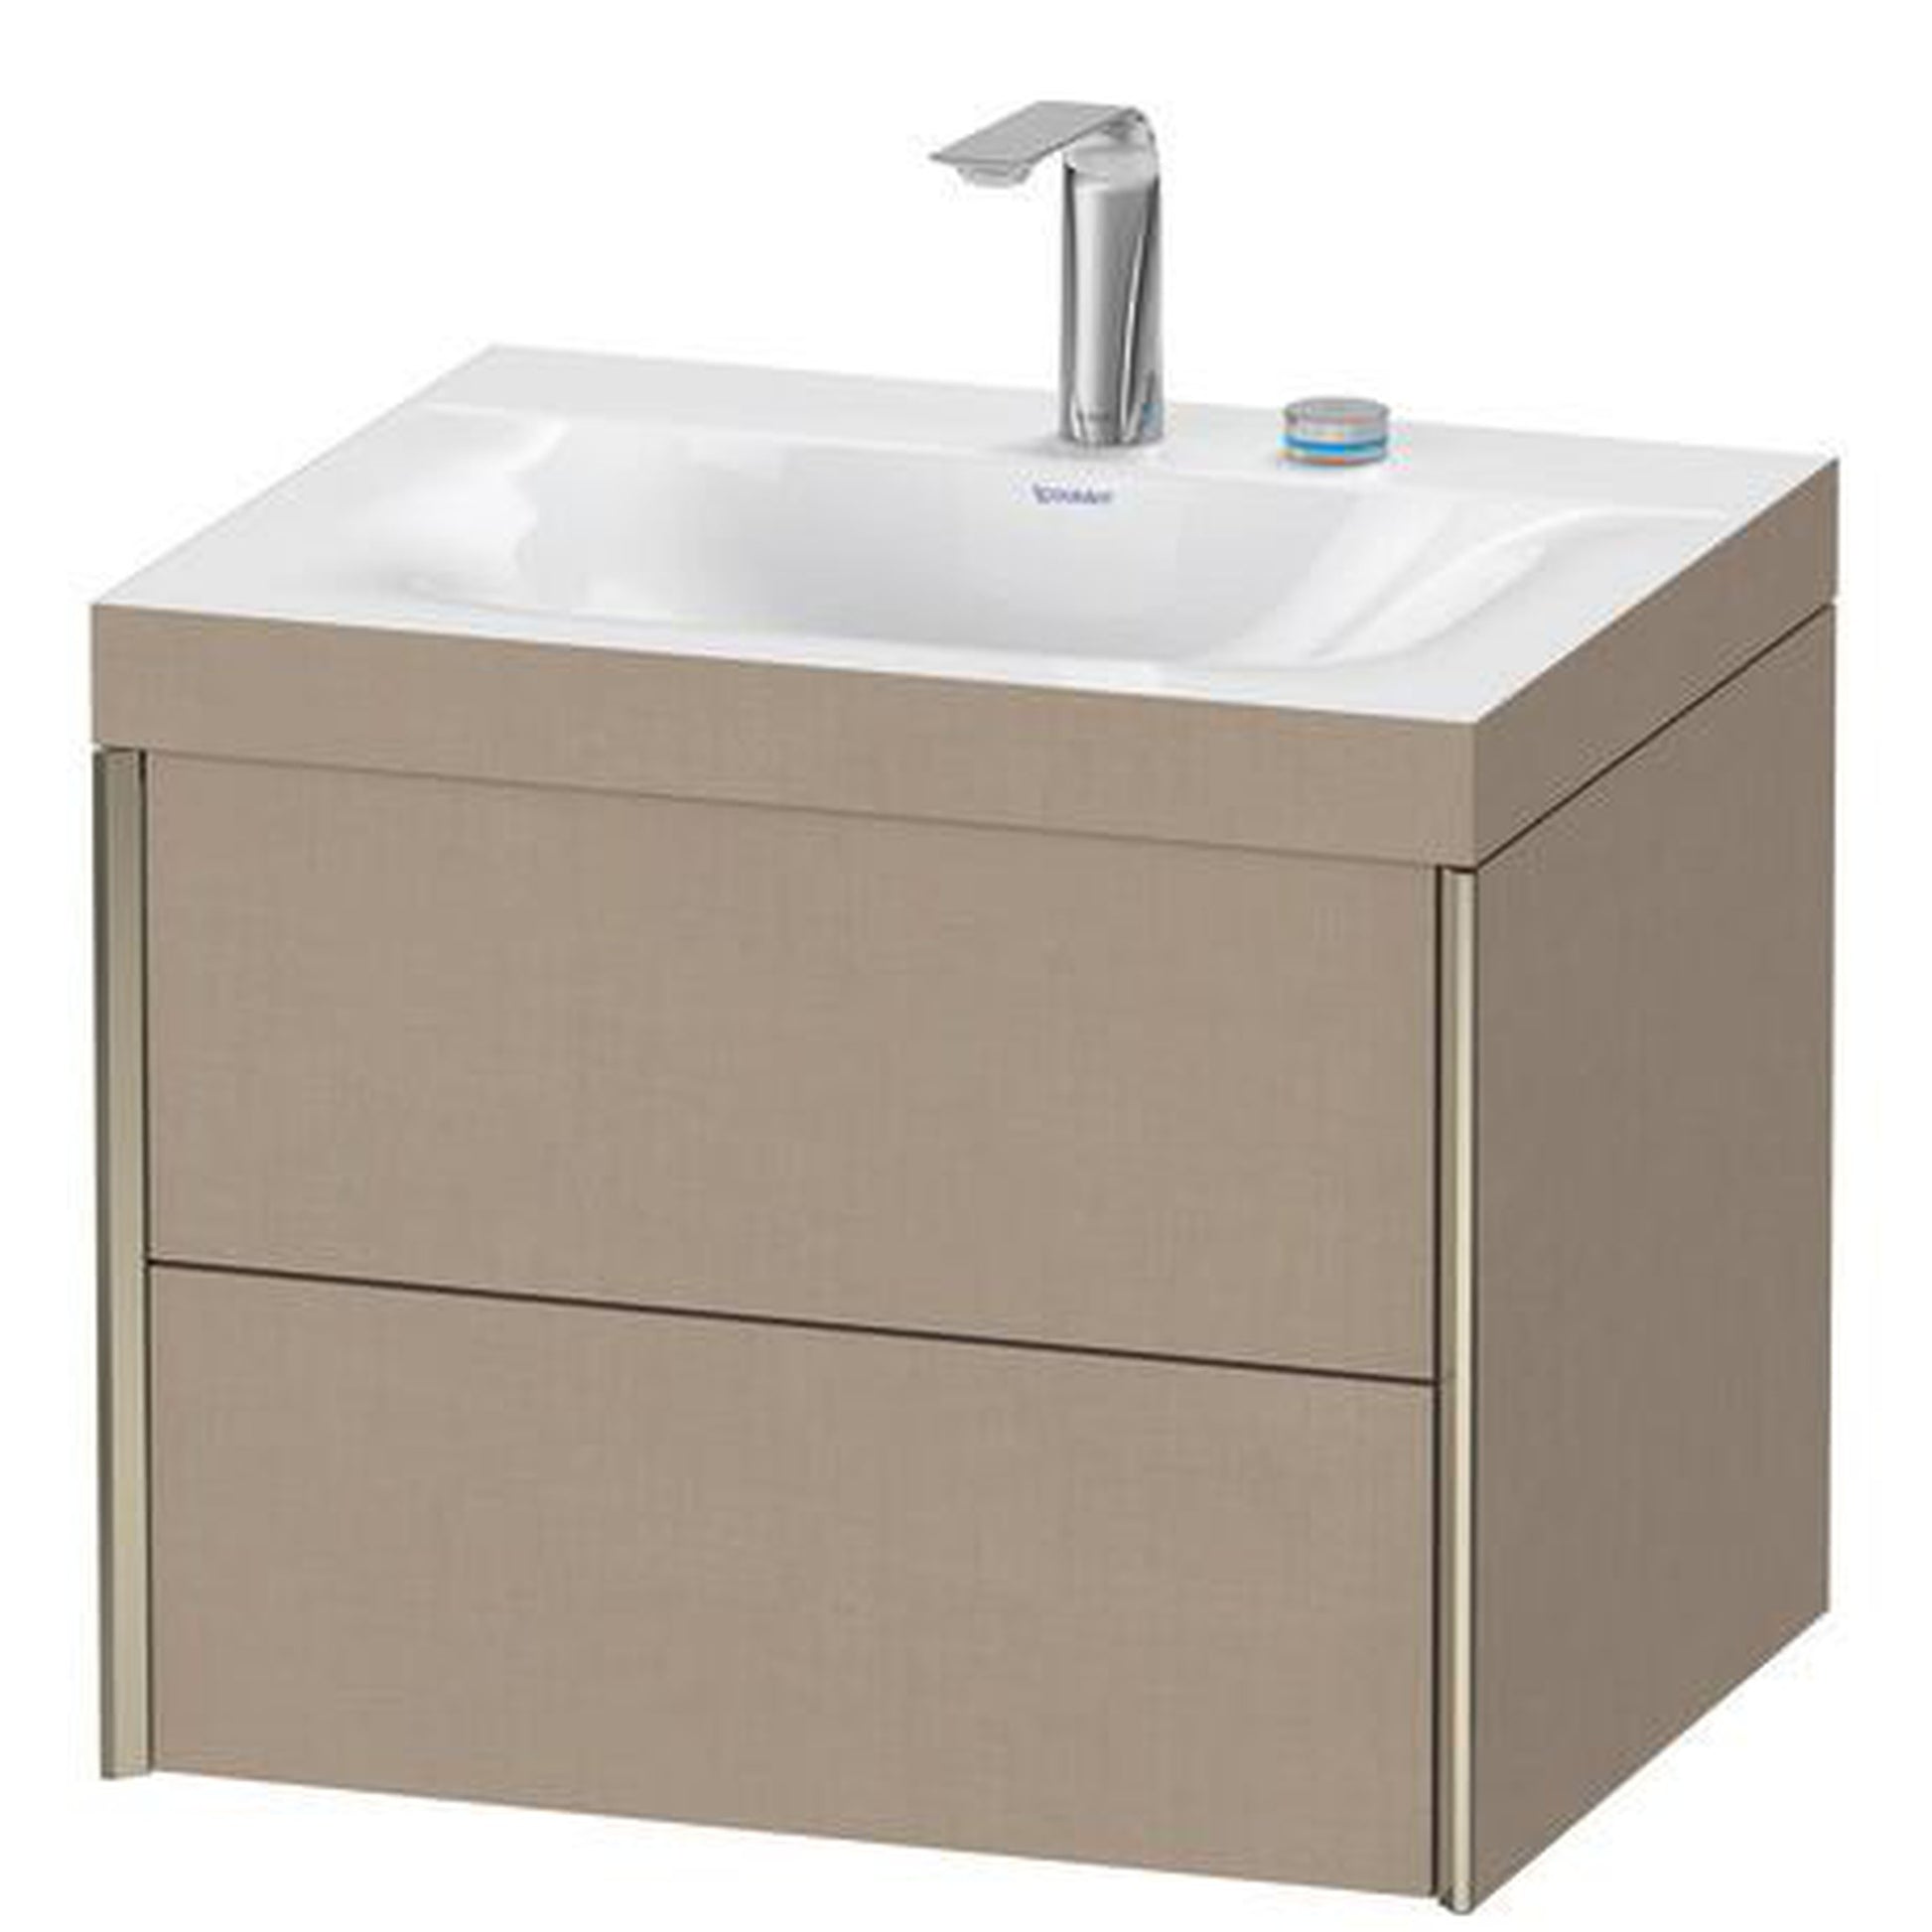 Duravit Xviu 24" x 20" x 19" Two Drawer C-Bonded Wall-Mount Vanity Kit With Two Tap Holes, Linen (XV4614EB175C)